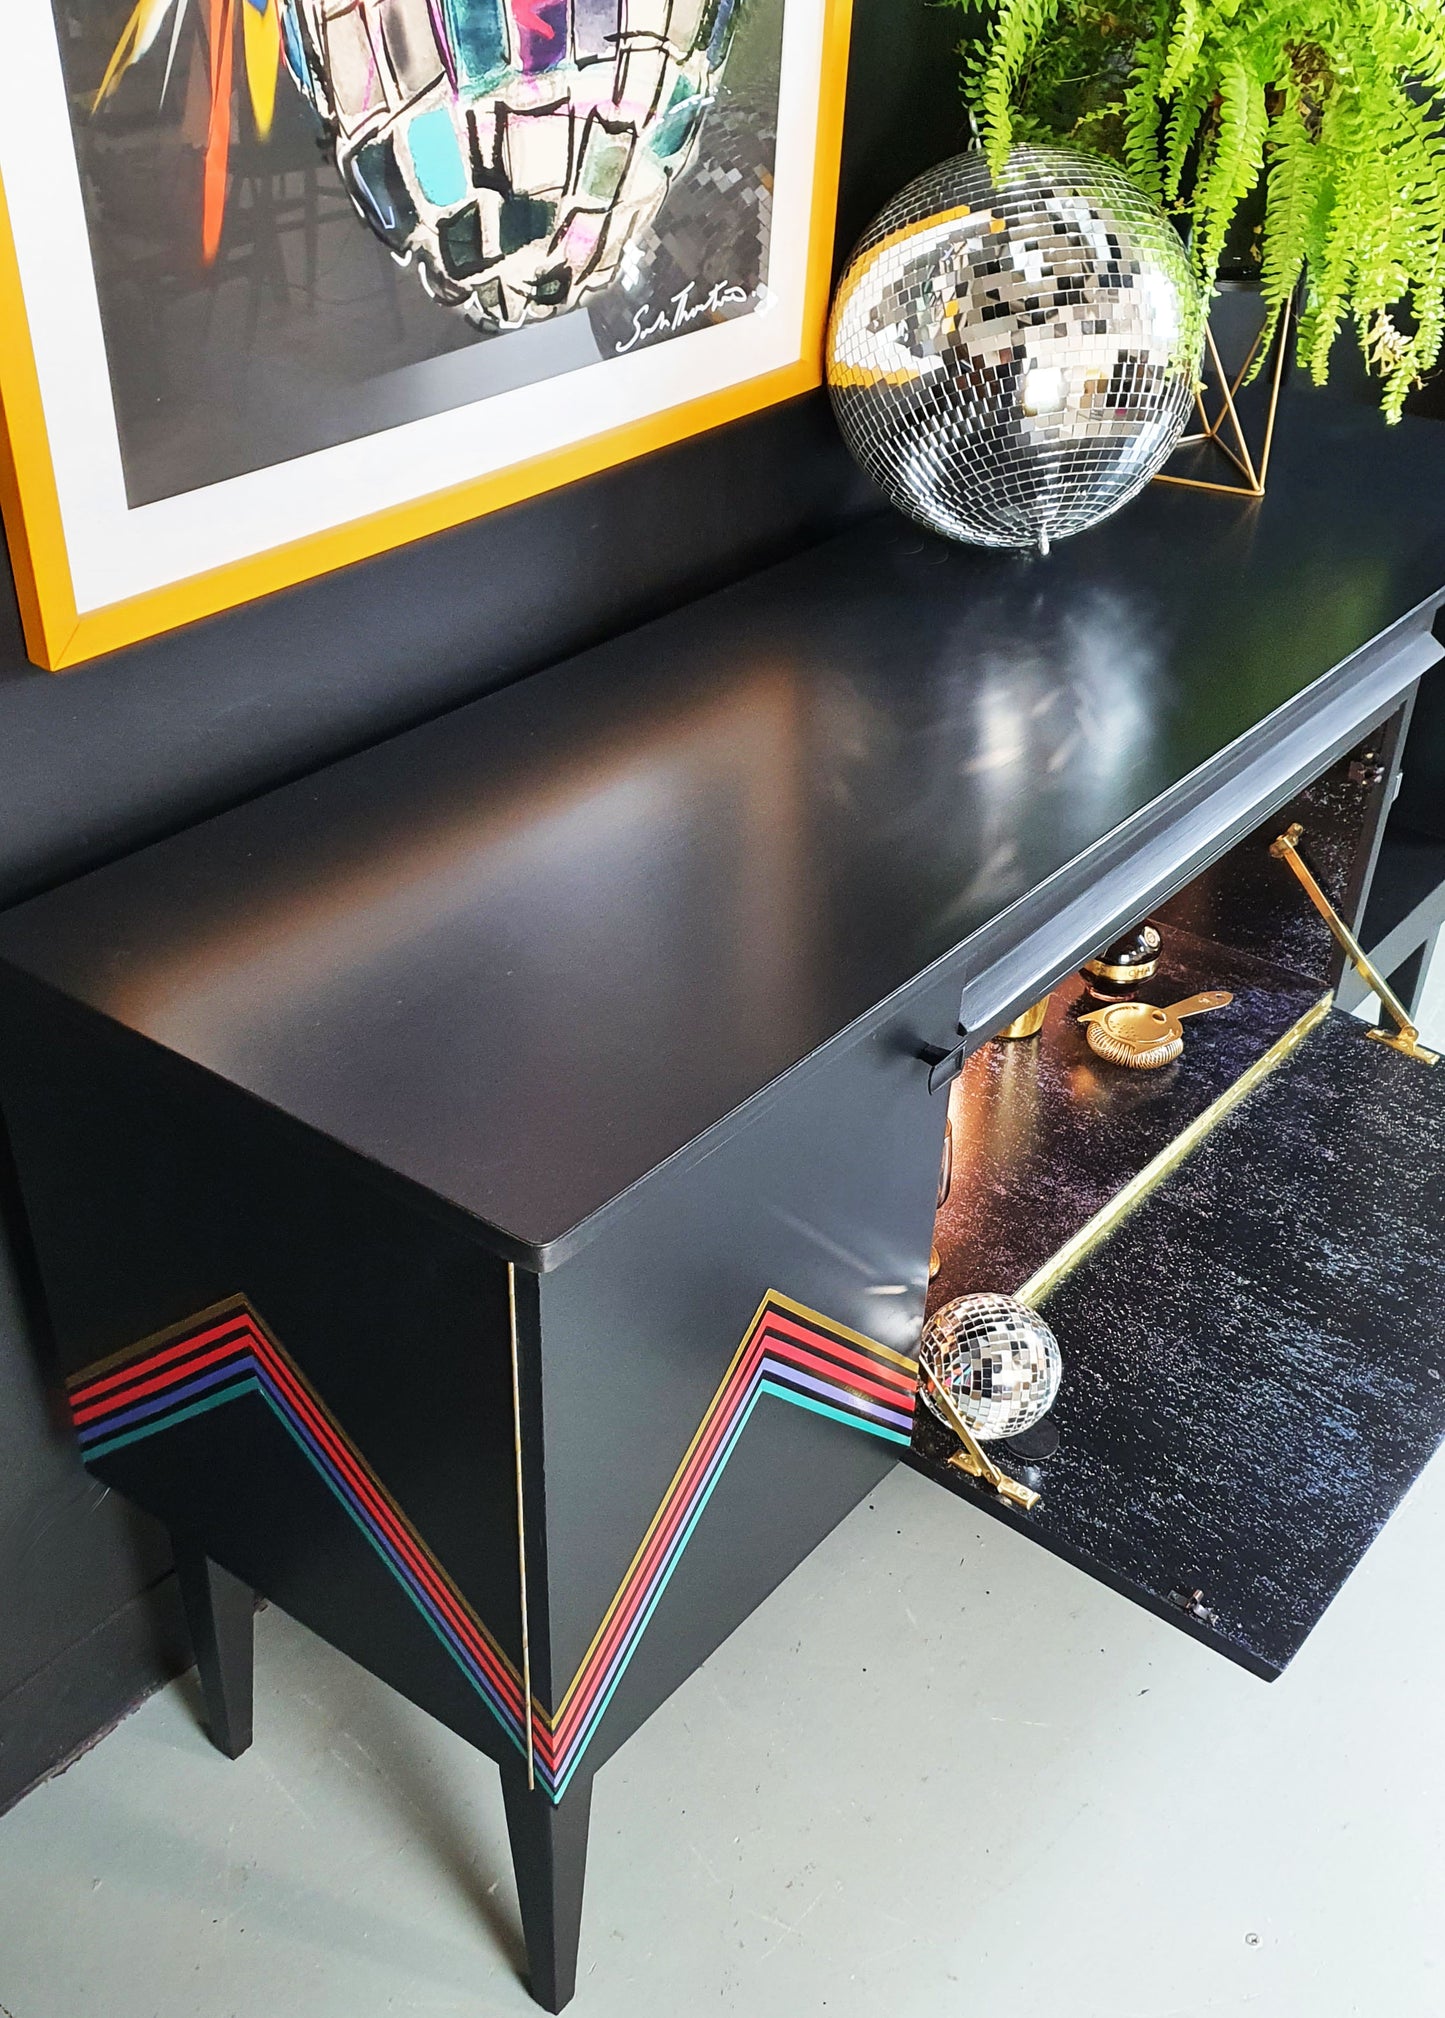 'Vibe' - Upcycled Mid Century cocktail Sideboard with geometric design & iridescent interior